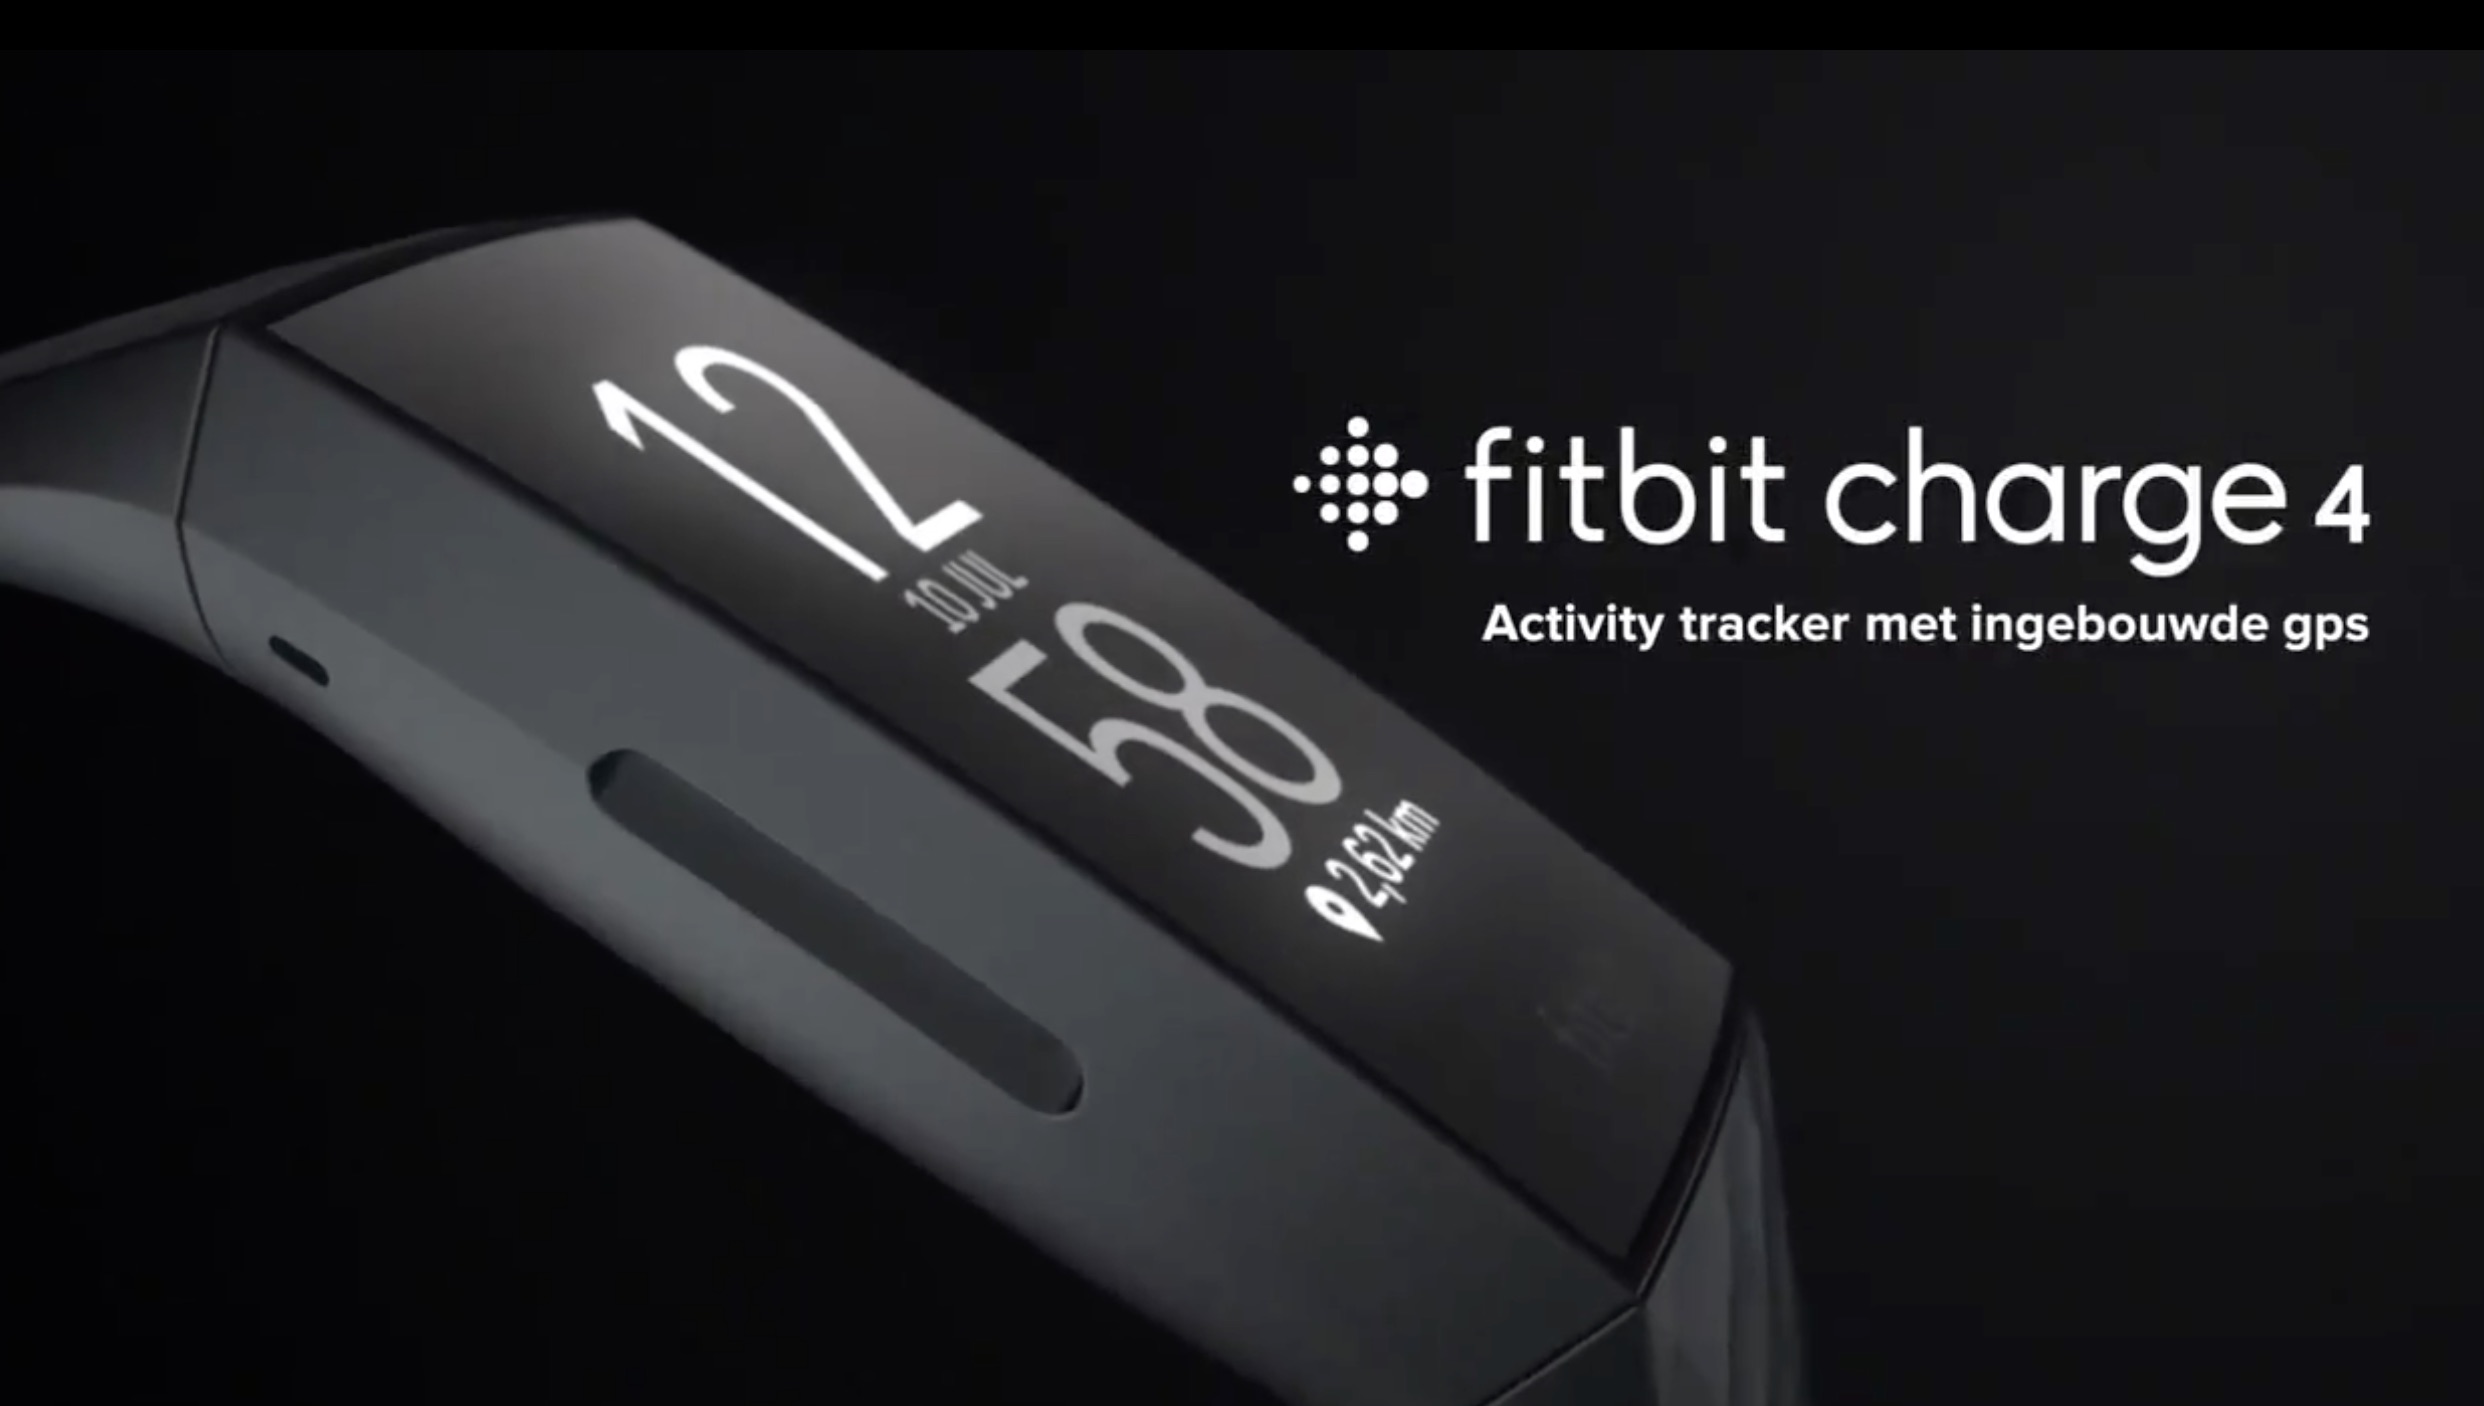 does the fitbit charge 4 have gps